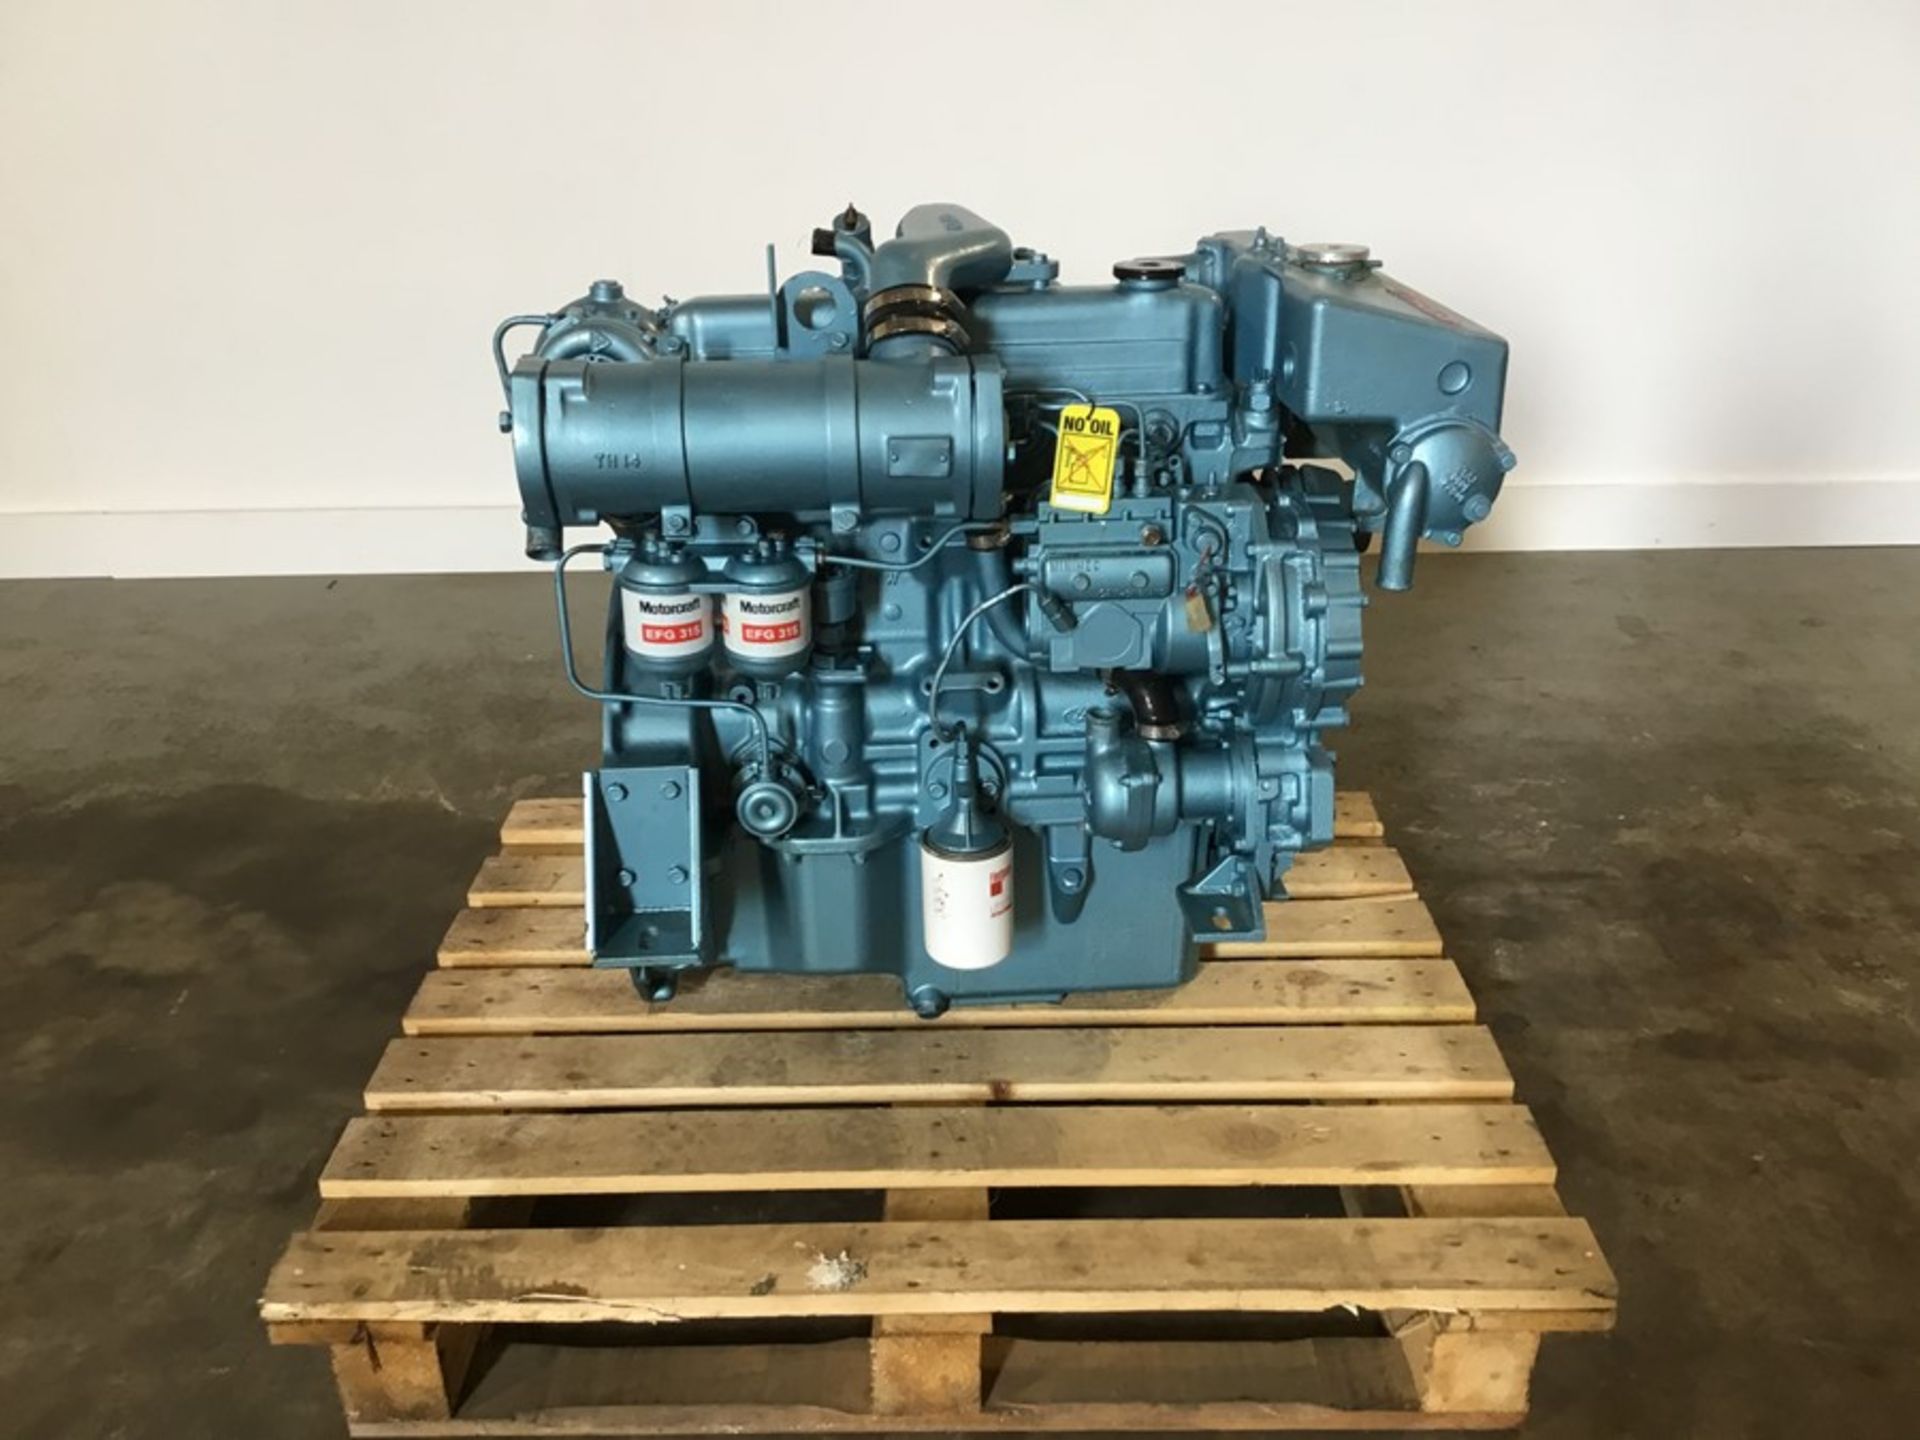 Ford 2722E Marine Diesel engine: Ford 2722e 4cyl Turbo 140Hp @2500Rpm used low hours - Image 18 of 18